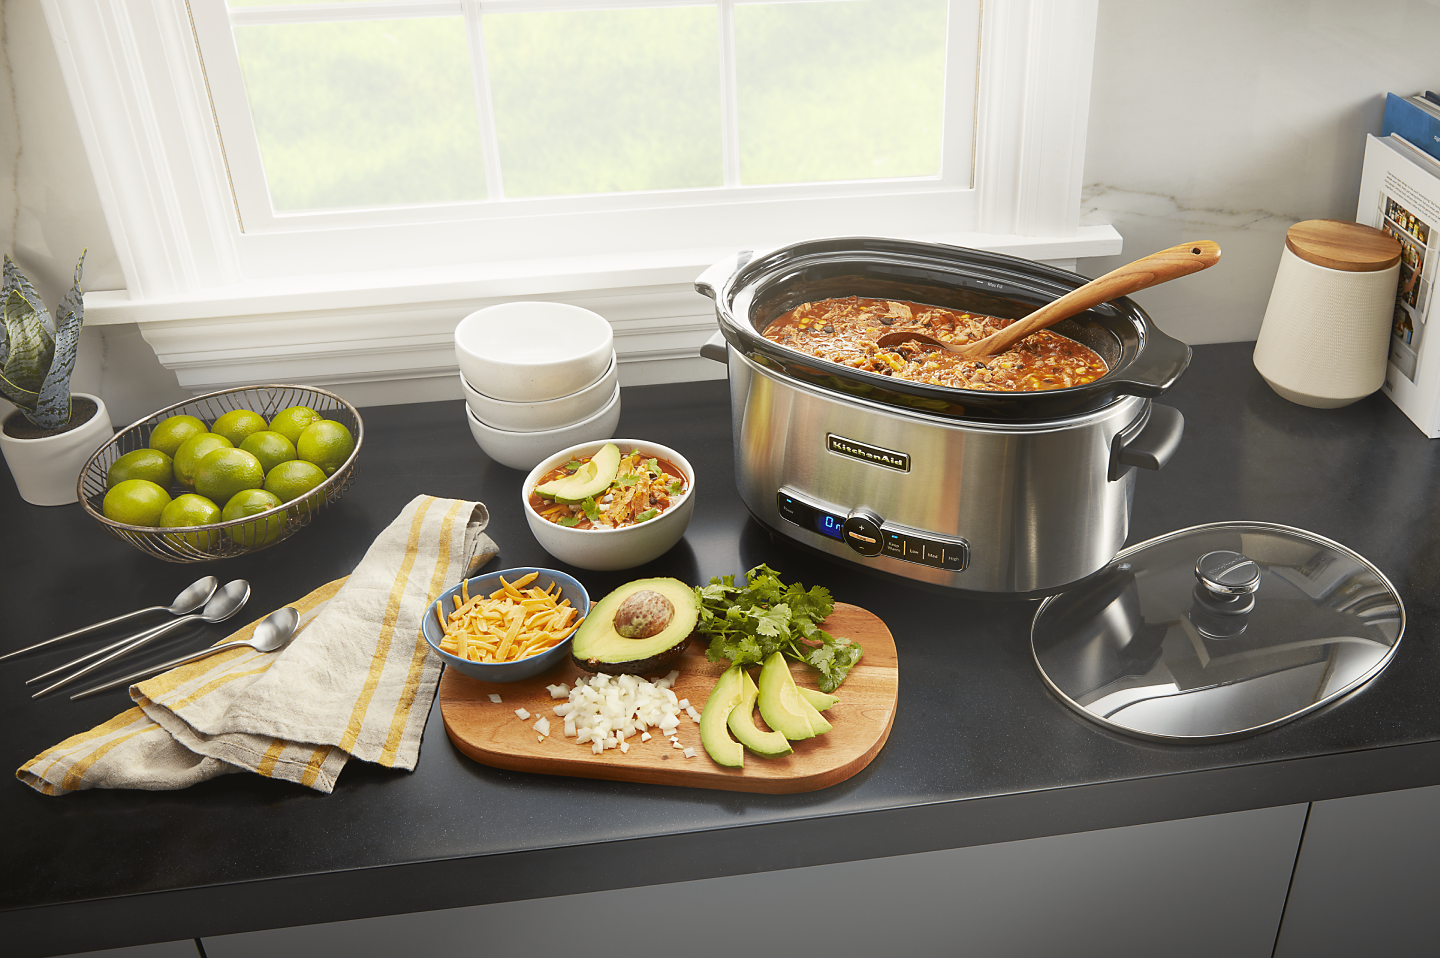 KitchenAid® slow cooker filled with chili next to a cutting board of vegetables and herbs